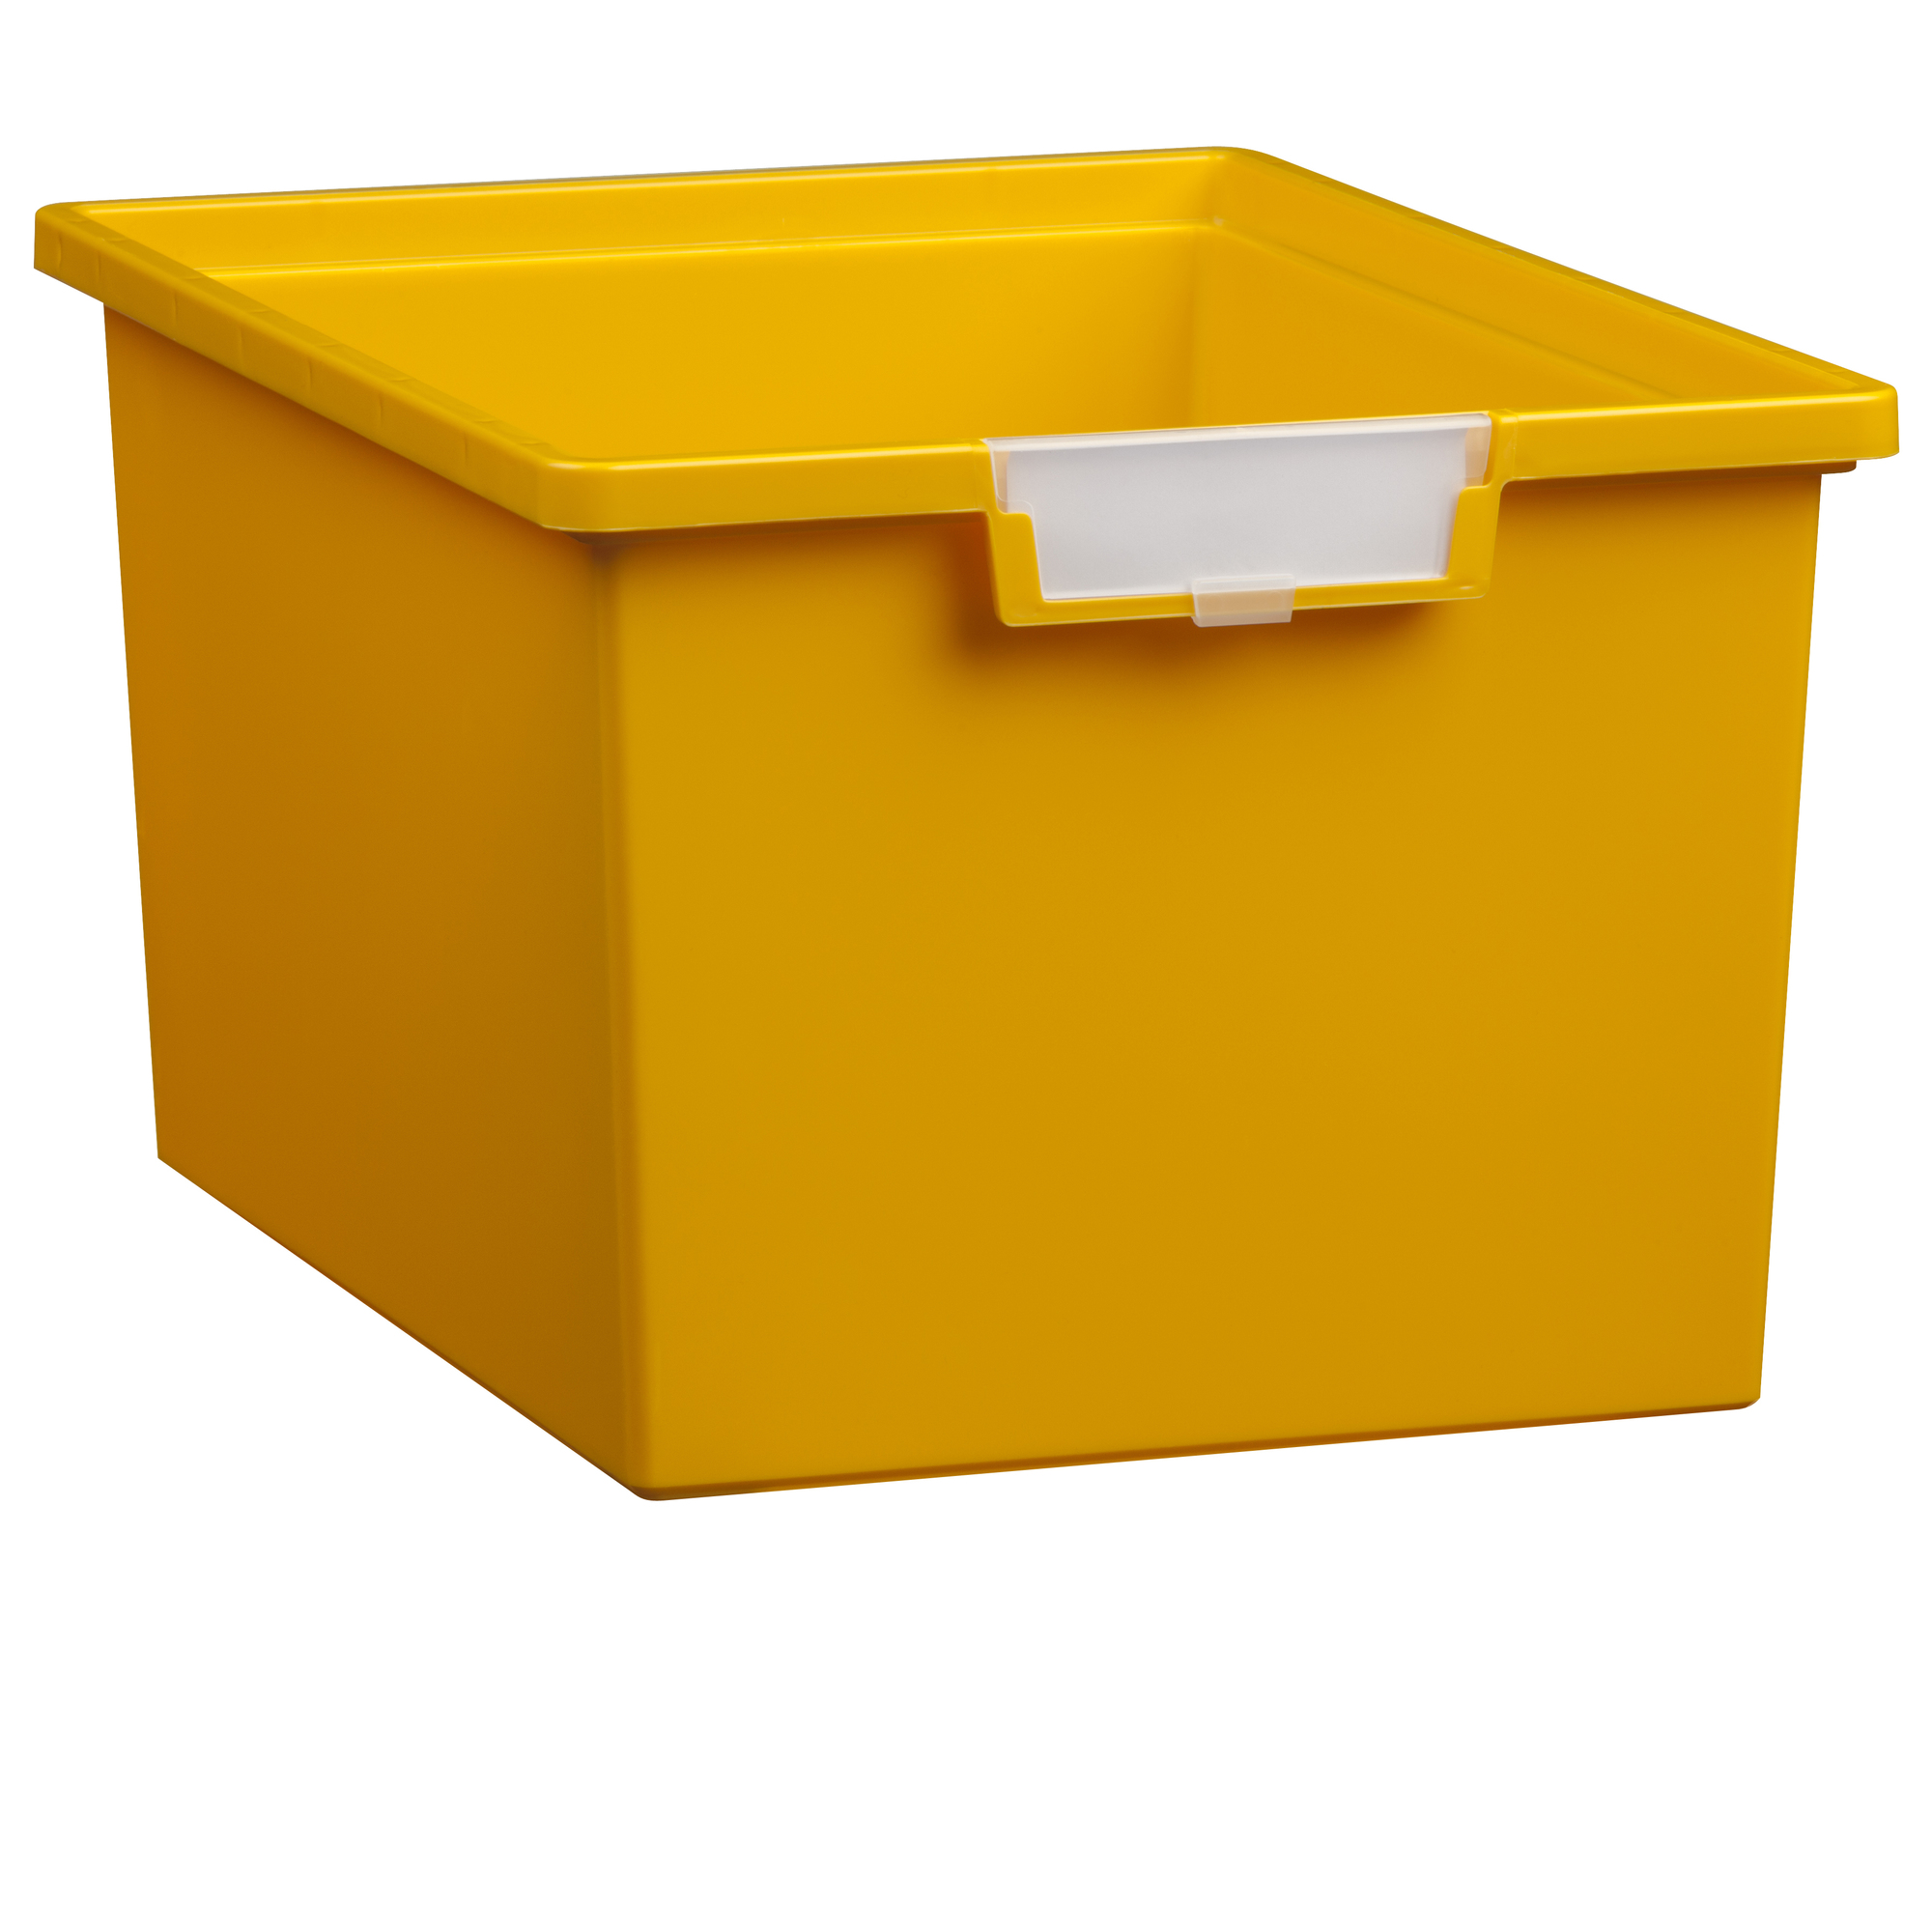 Certwood StorWerks, Slim Line 9Inch Tray in Primary Yellow-1PK, Included (qty.) 1 Height 9 in, Model CE1953PY1